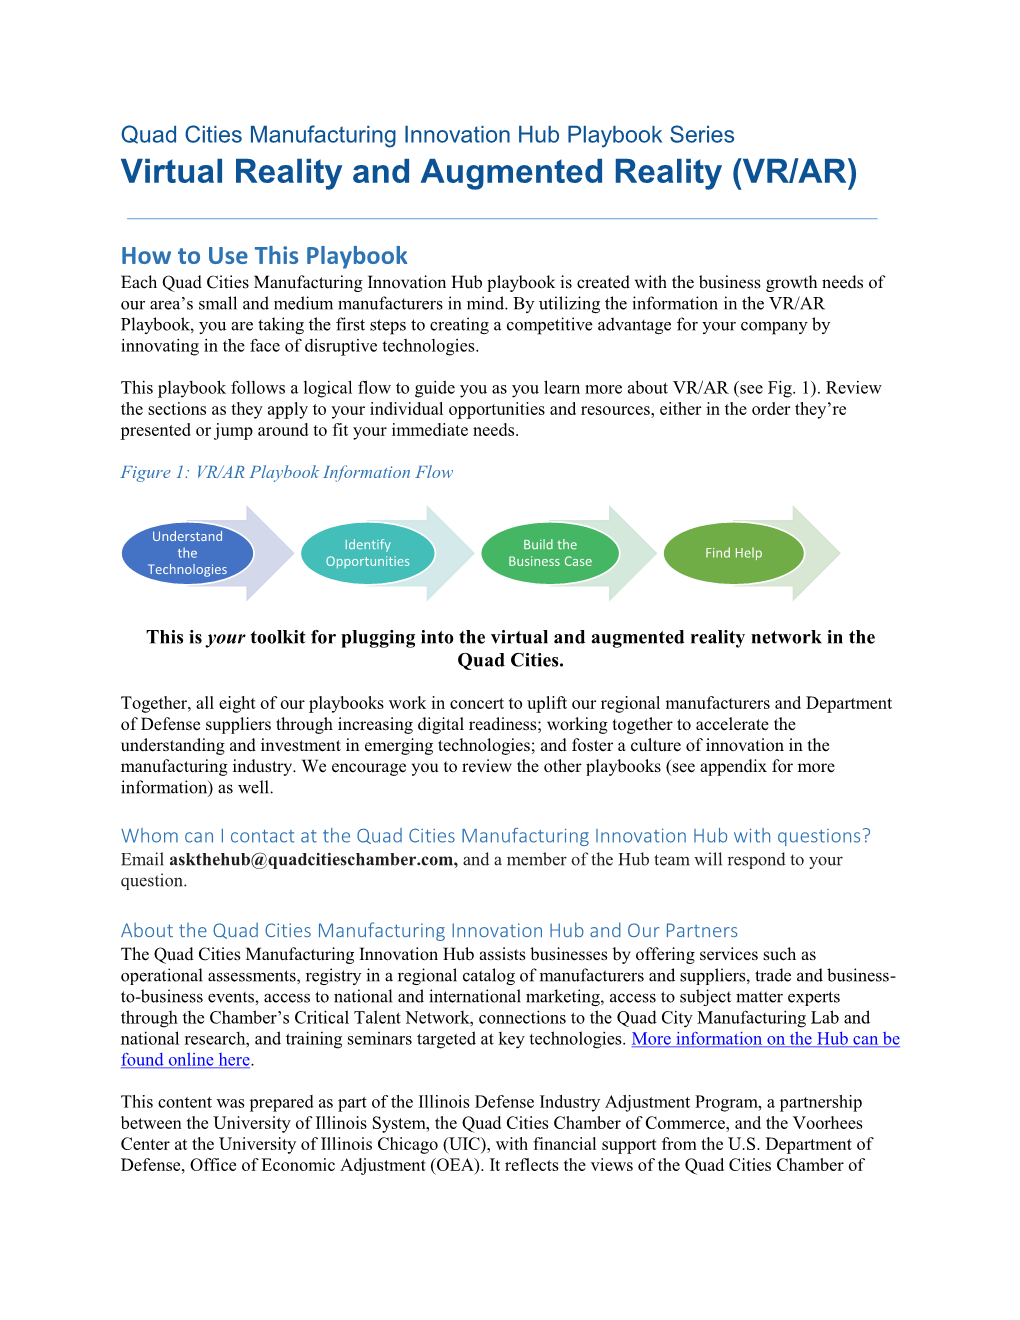 Virtual Reality and Augmented Reality (VR/AR)